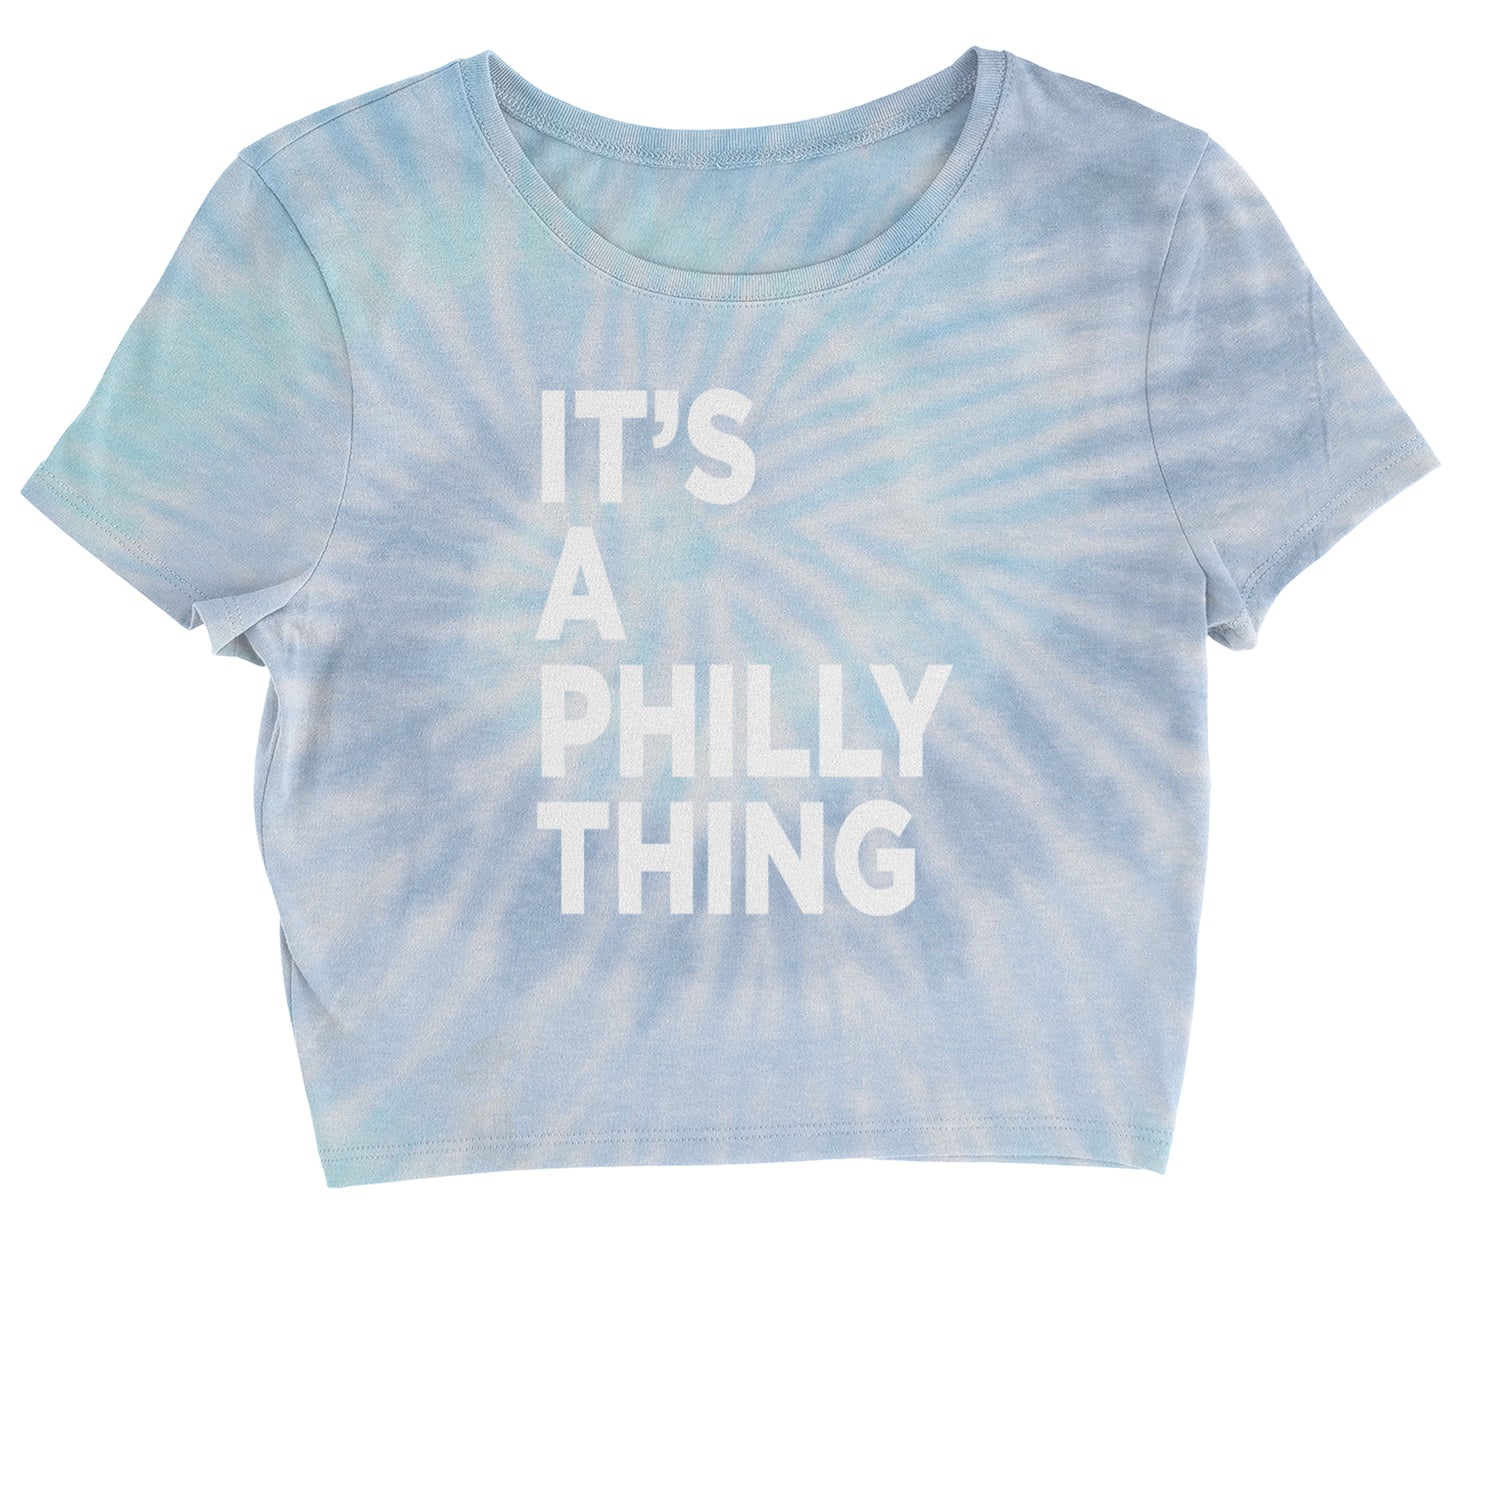 PHILLY It's A Philly Thing Cropped T-Shirt baseball, dilly, filly, football, jawn, morgan, Philadelphia, philli by Expression Tees